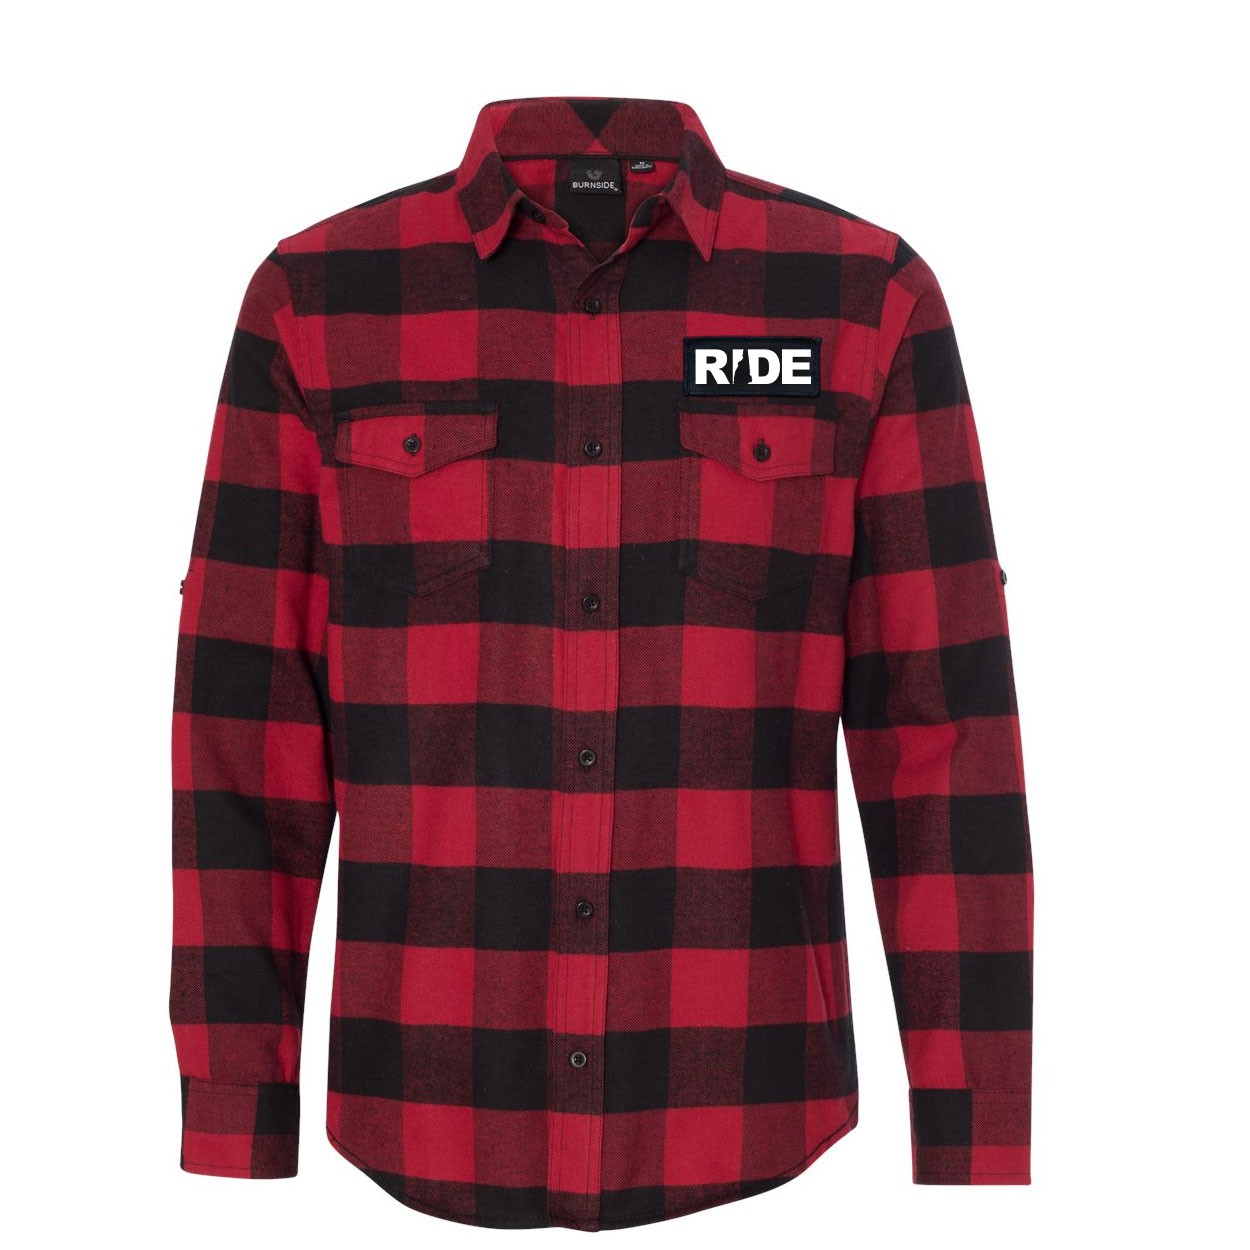 Ride New Hampshire Classic Unisex Long Sleeve Woven Patch Flannel Shirt Red/Black Buffalo (White Logo)